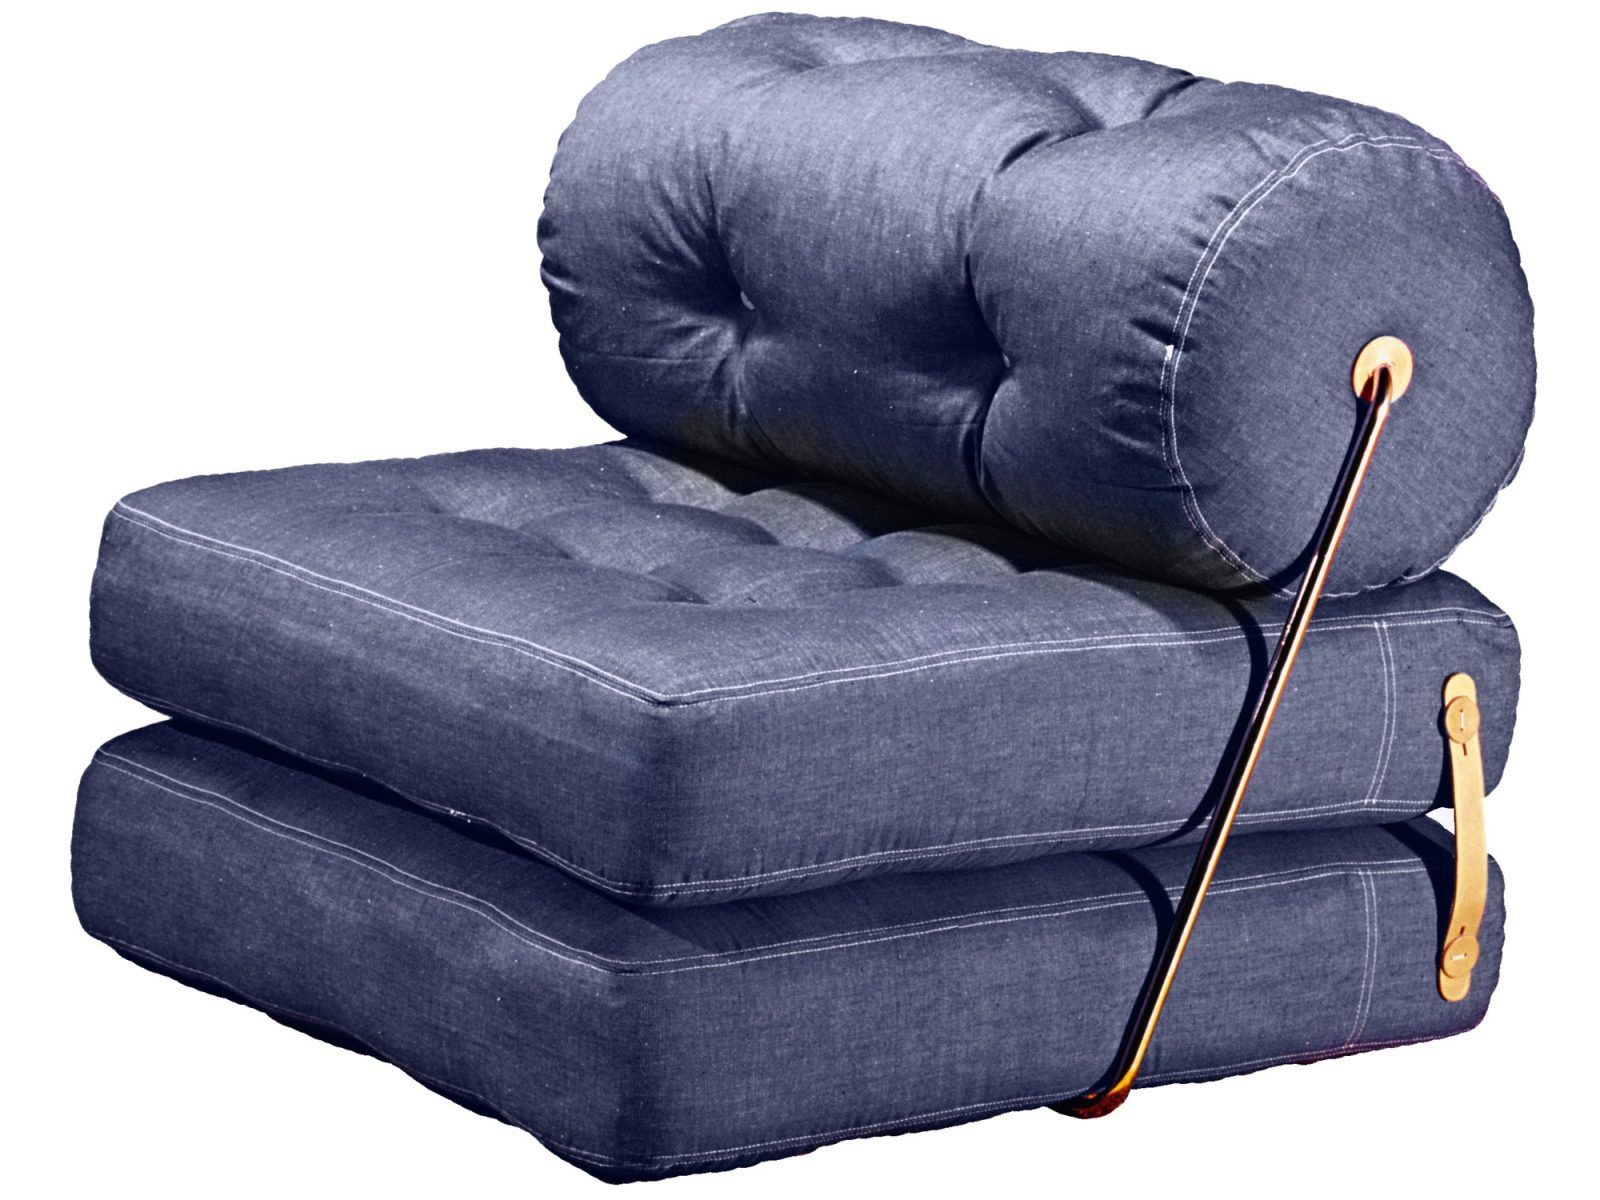 TAJT, seating and lounge furniture in blue denim with gold-coloured metal details.